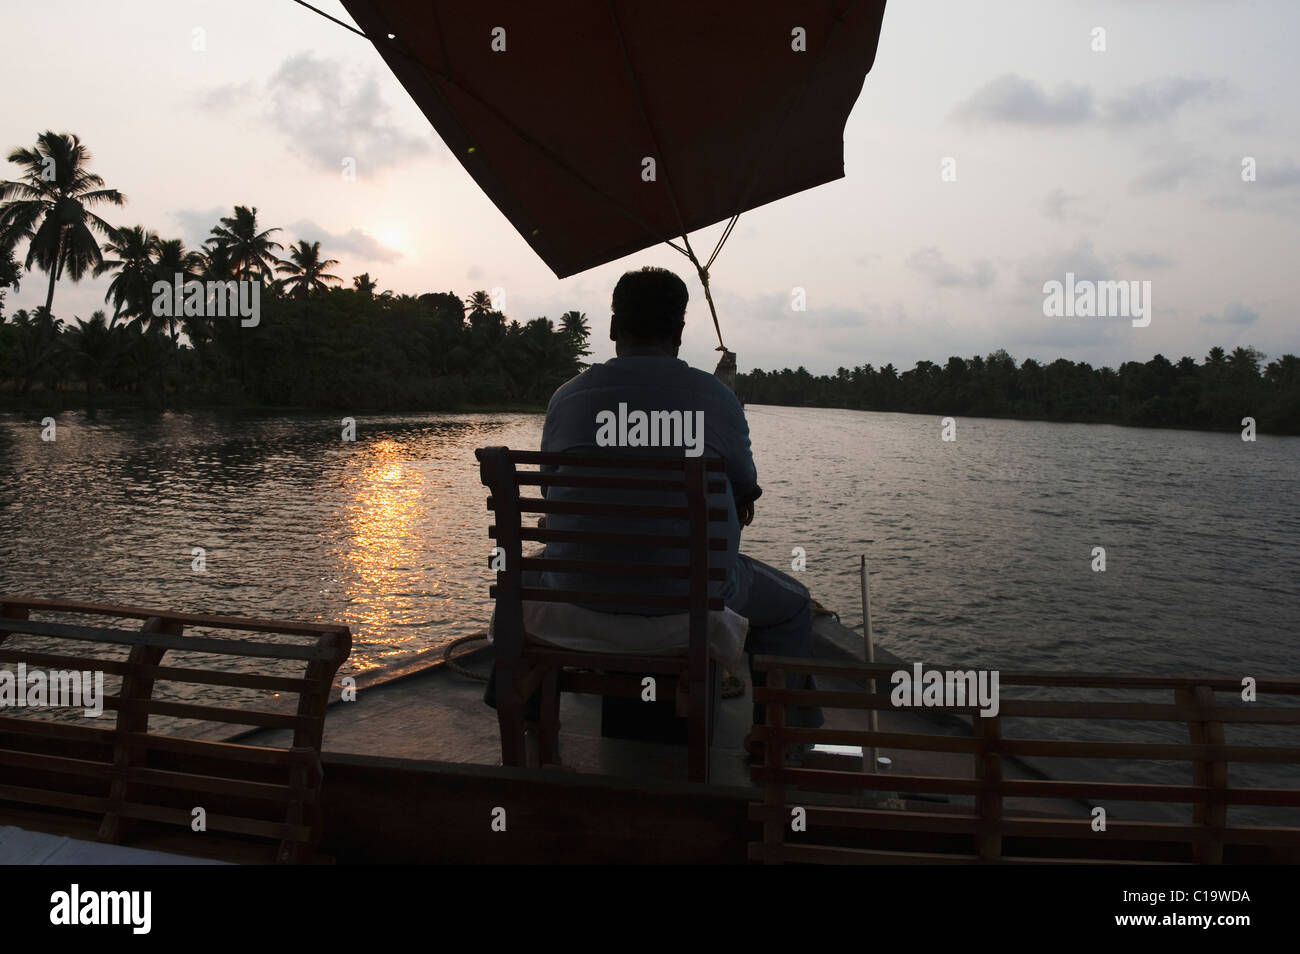 Man sitting on a chair on a boat, Kerala Backwaters, Alleppey, Alappuzha District, Kerala, India Stock Photo